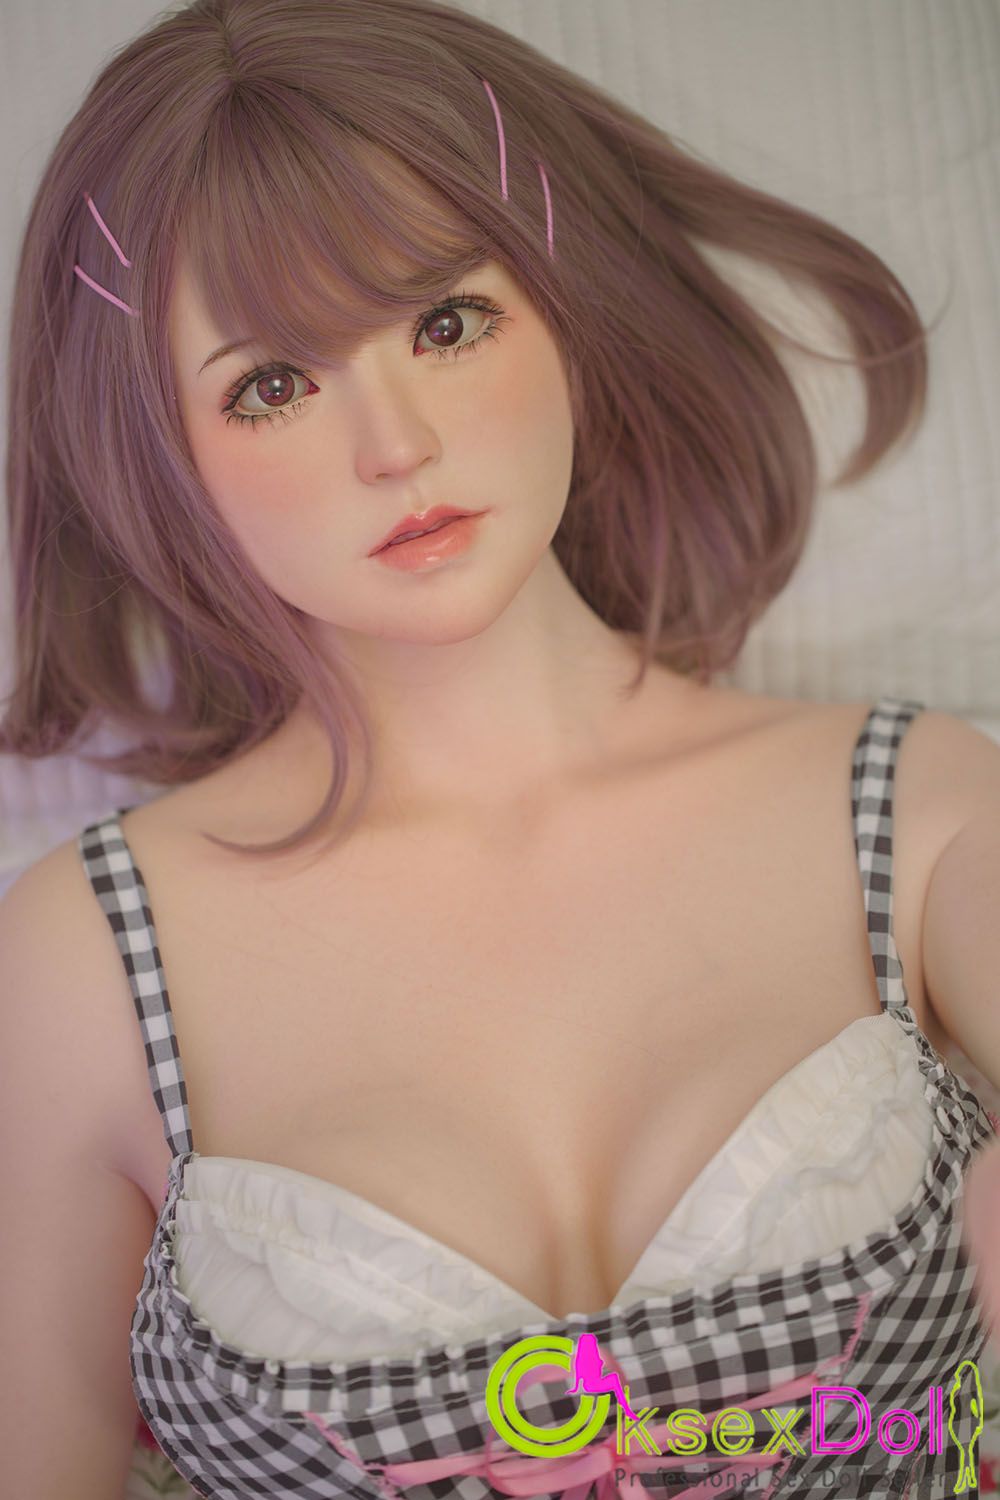 Small Tits Doll images